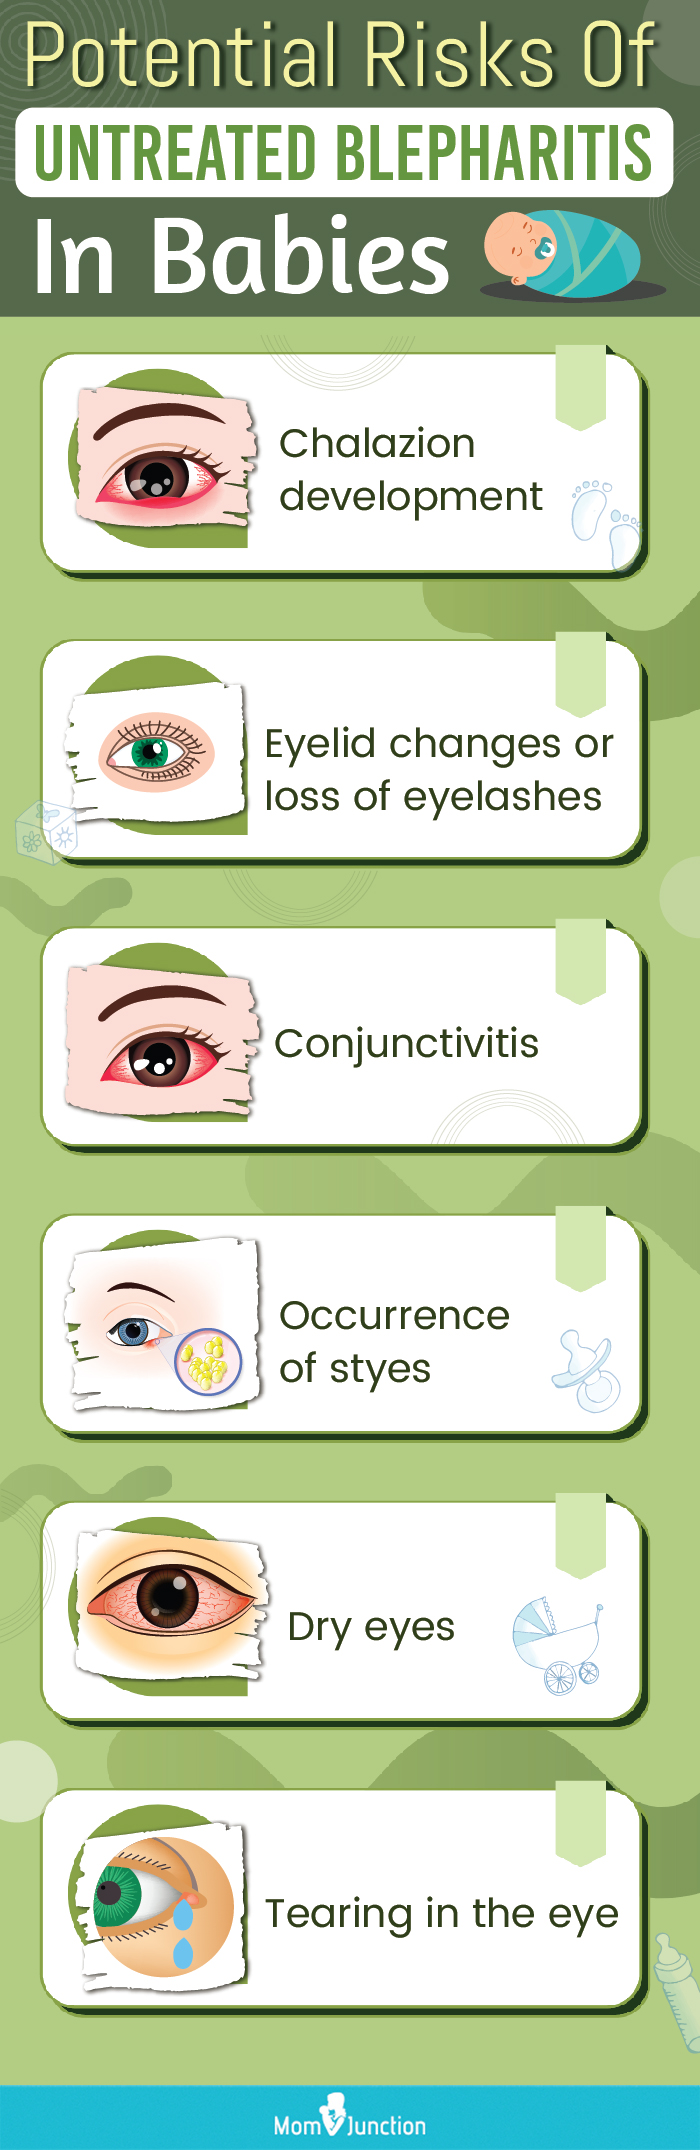 consequences of blepharitis in infants (infographic)